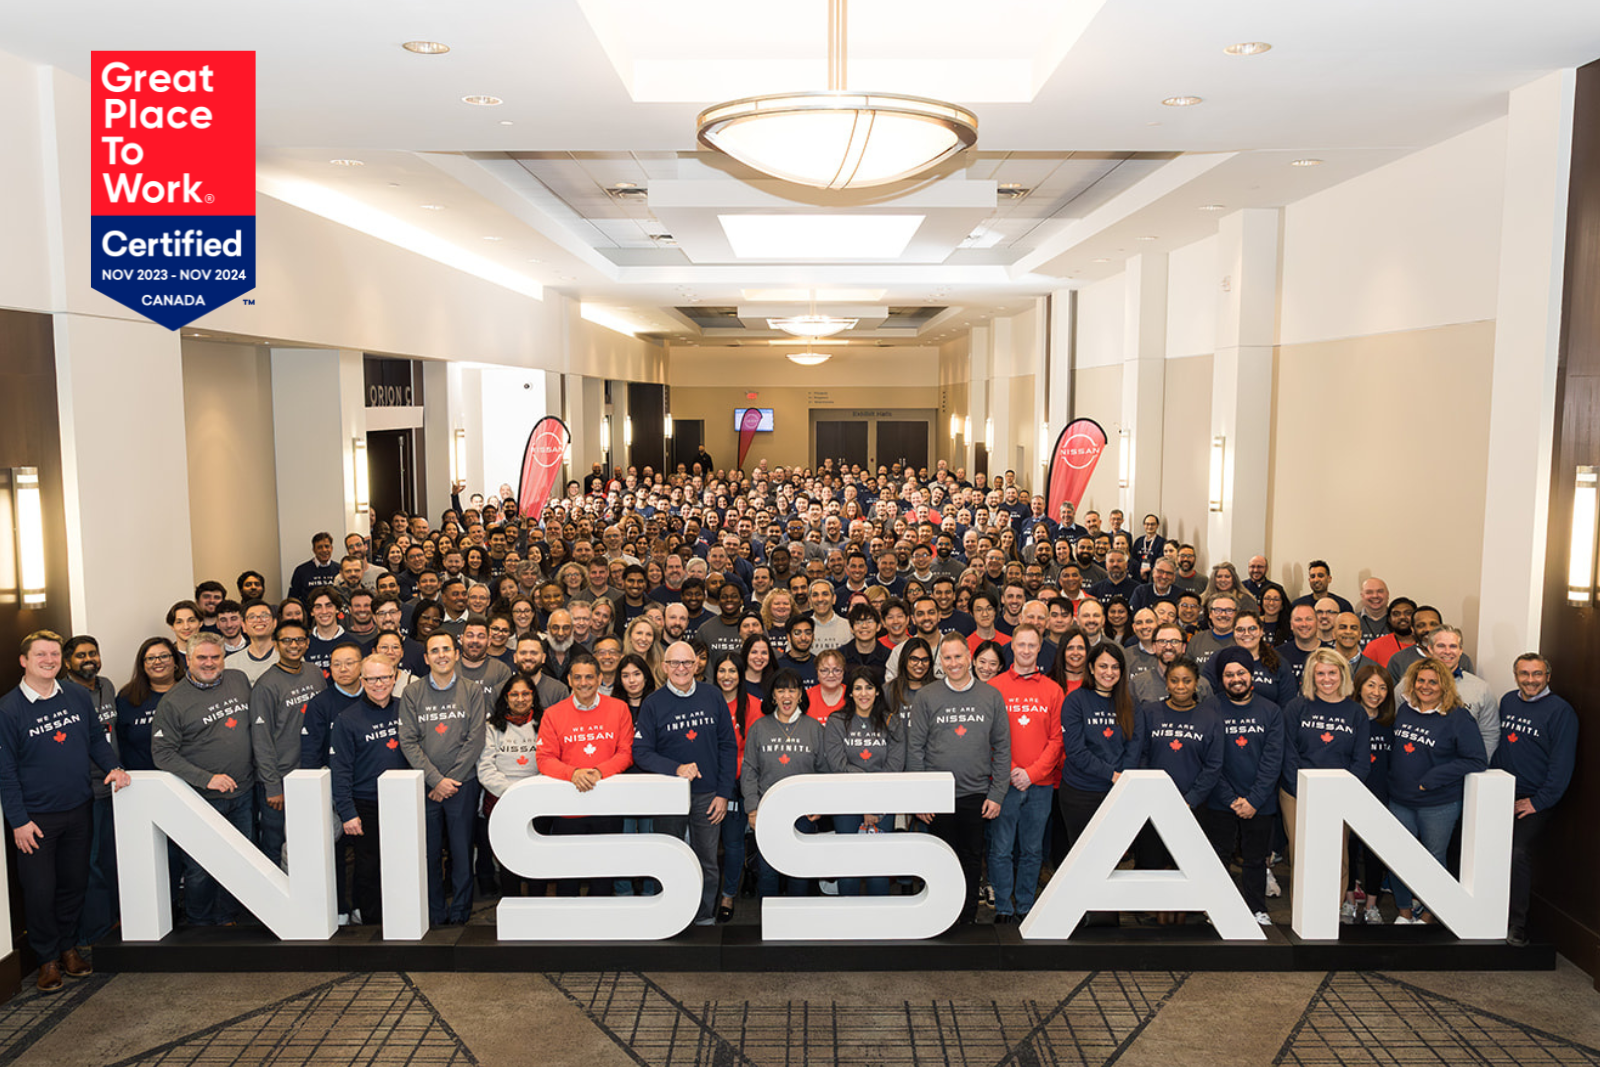 Nissan Canada workers pose for a photo